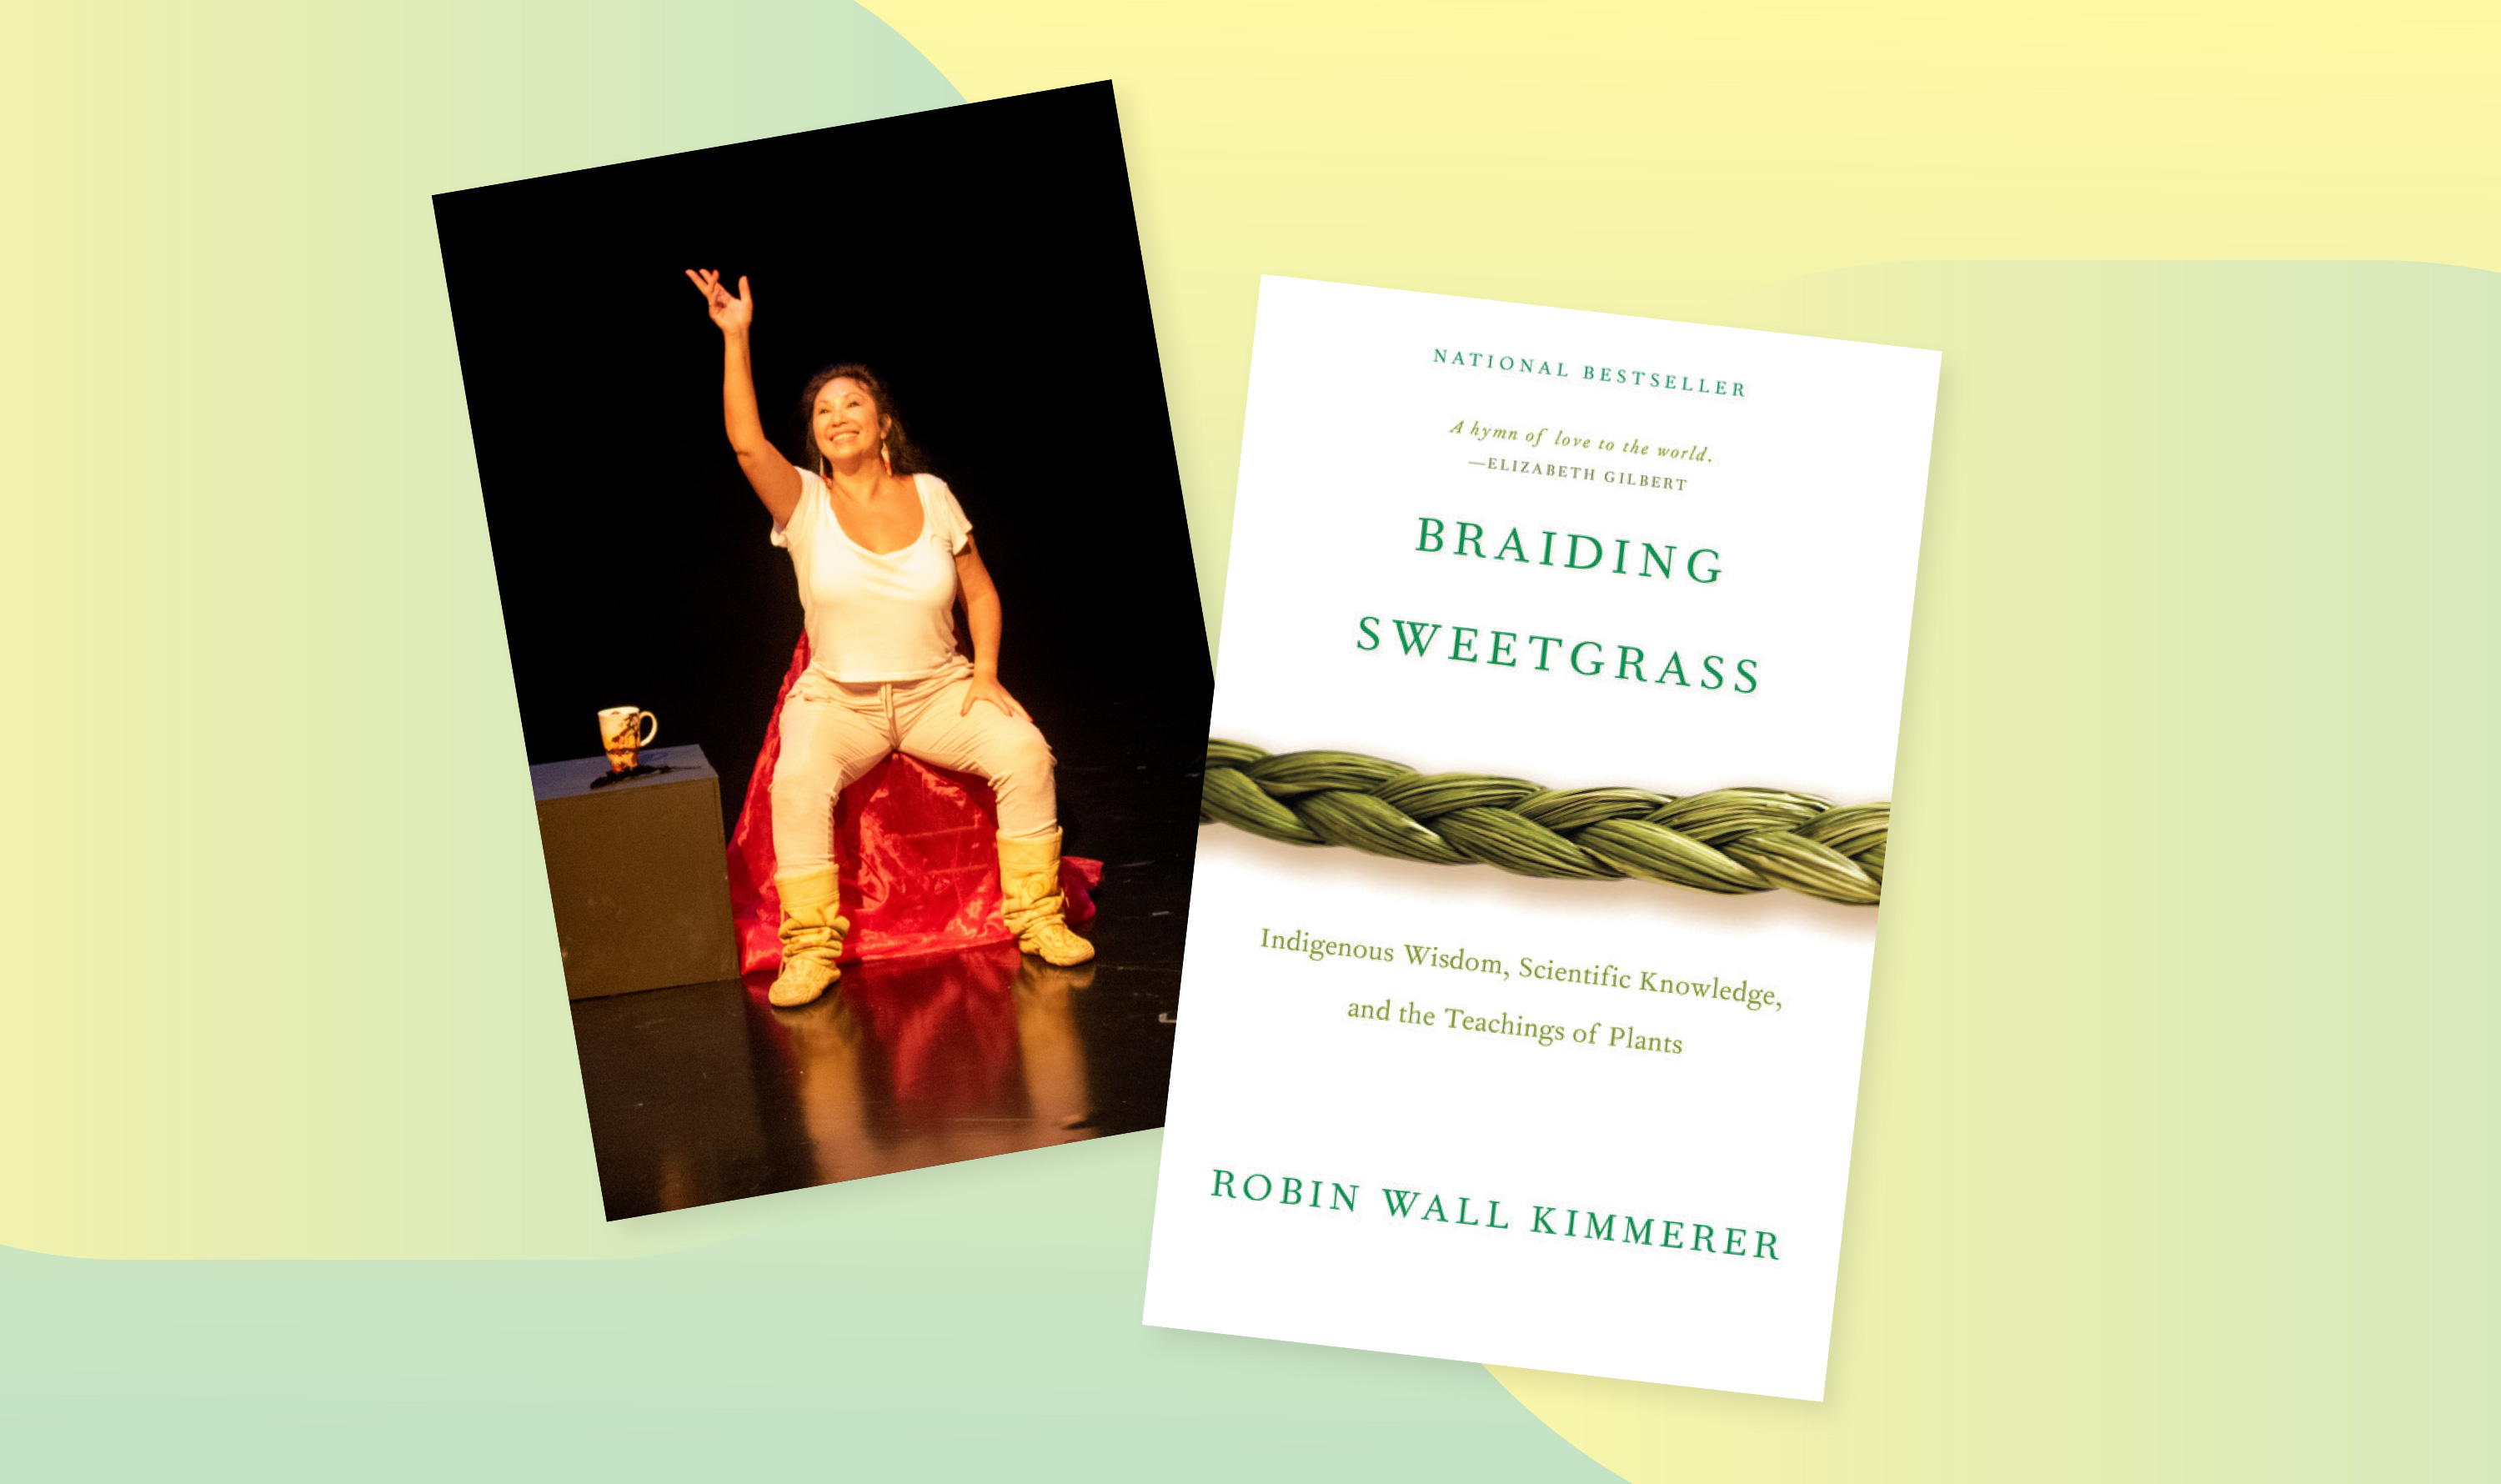 image from trina moyan's play and the cover of the book braiding sweetgrass